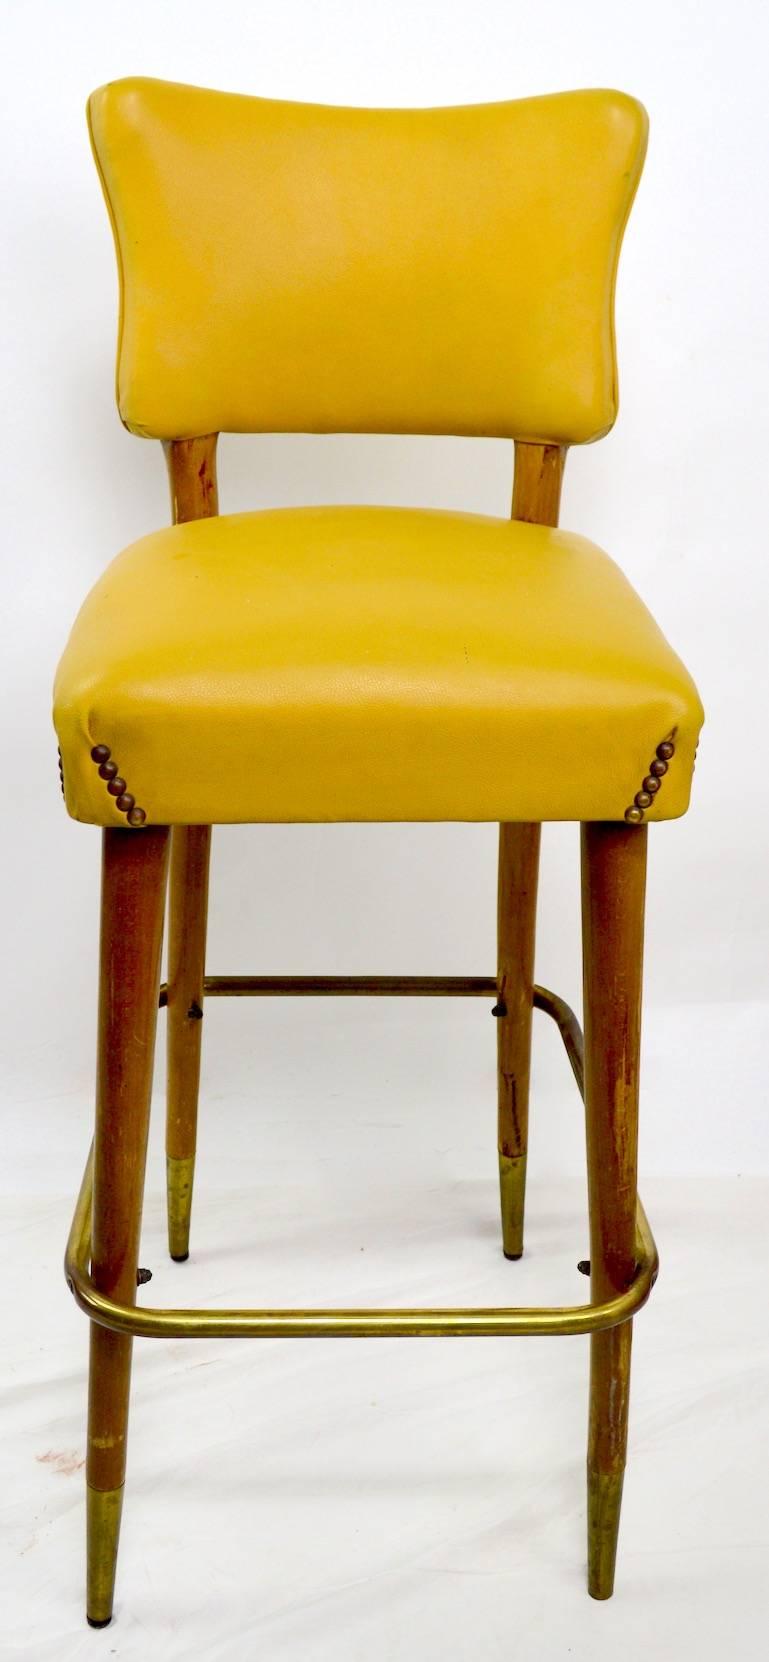 Classic Mid Century bar, counter stools with studded vinyl upholstery and wood legs. Sturdy and solid,  shows some wear to the vinyl seats and backs, wear to finish on wood elements. Seat H 29 foot rail H 12 inch.
Only one available.